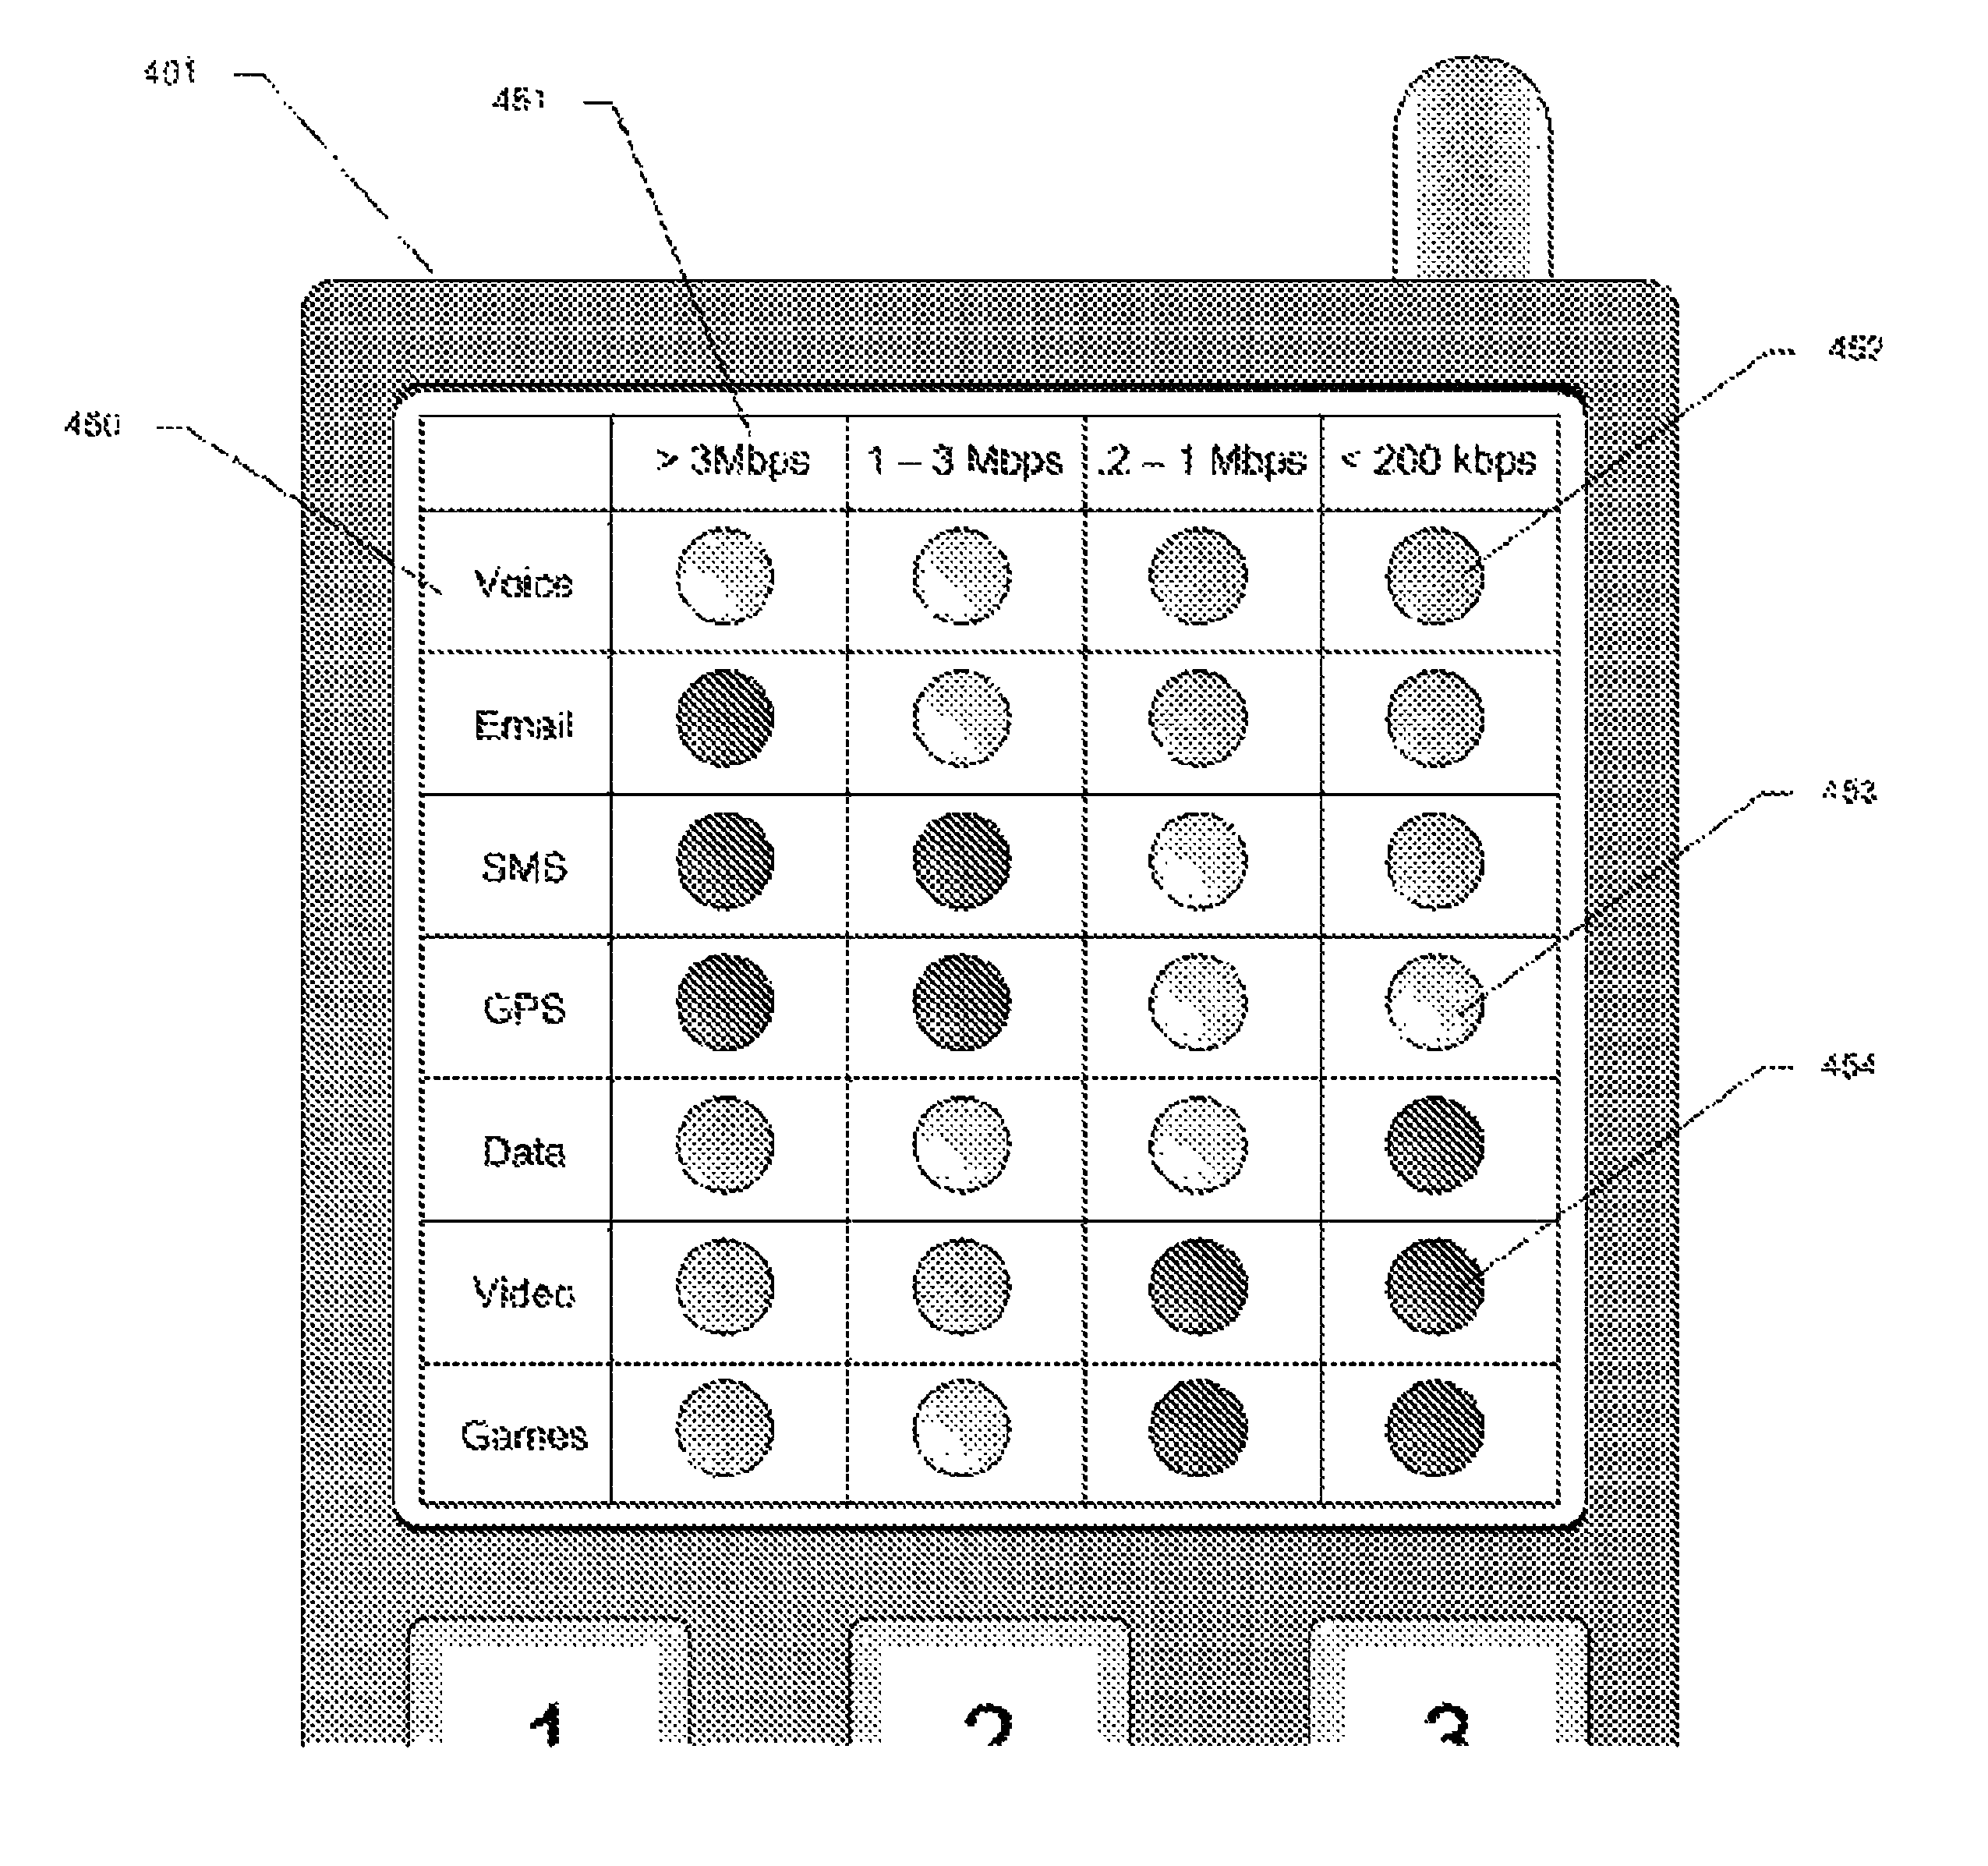 Lightweight application level policy management for portable wireless devices under varying network